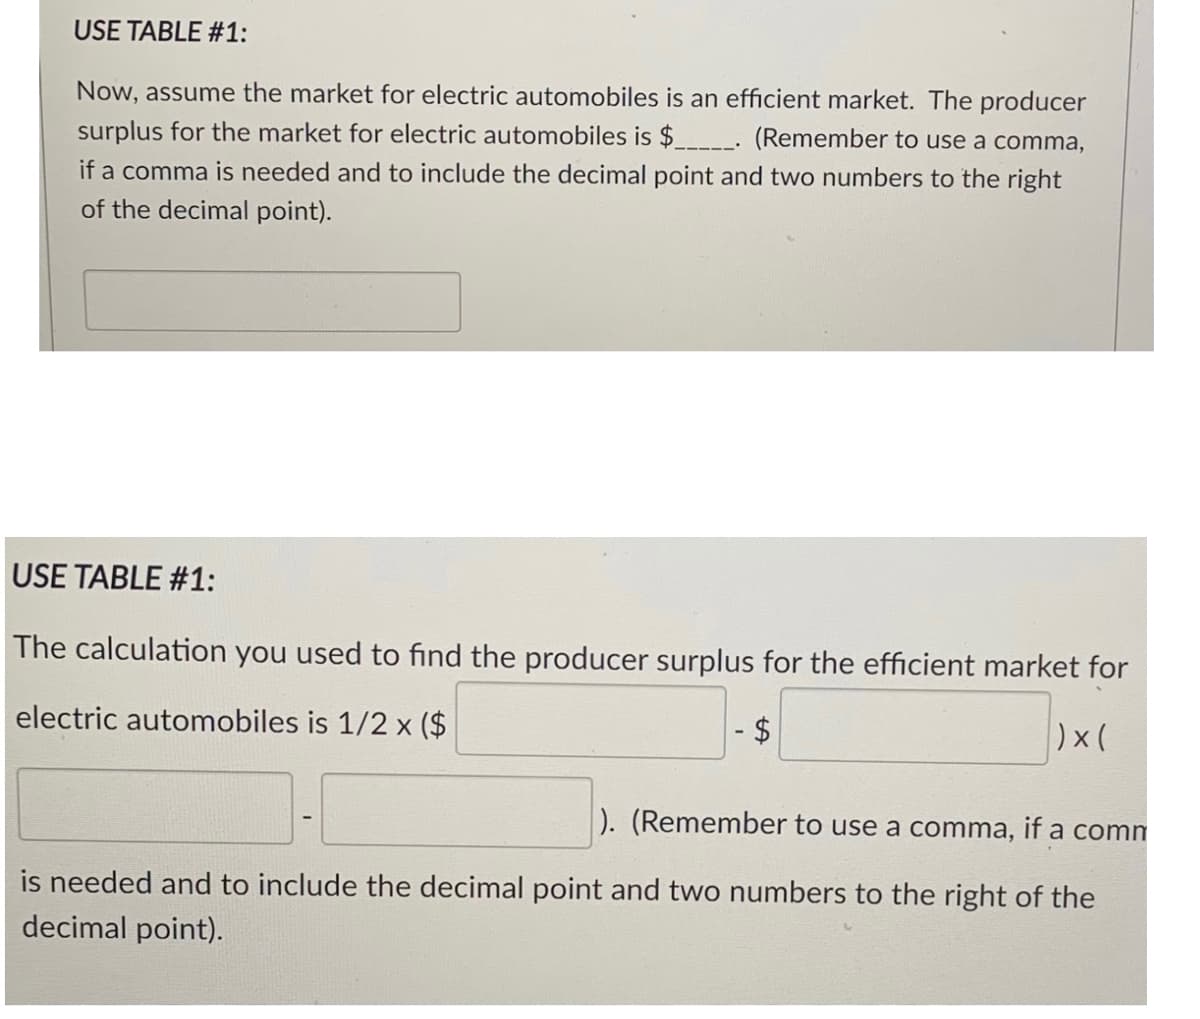 USE TABLE #1:
Now, assume the market for electric automobiles is an efficient market. The producer
surplus for the market for electric automobiles is $___- (Remember to use a comma,
if a comma is needed and to include the decimal point and two numbers to the right
of the decimal point).
USE TABLE #1:
The calculation you used to find the producer surplus for the efficient market for
electric automobiles is 1/2 x ($
$4
)x(
). (Remember to use a comma, if a comm
is needed and to include the decimal point and two numbers to the right of the
decimal point).
